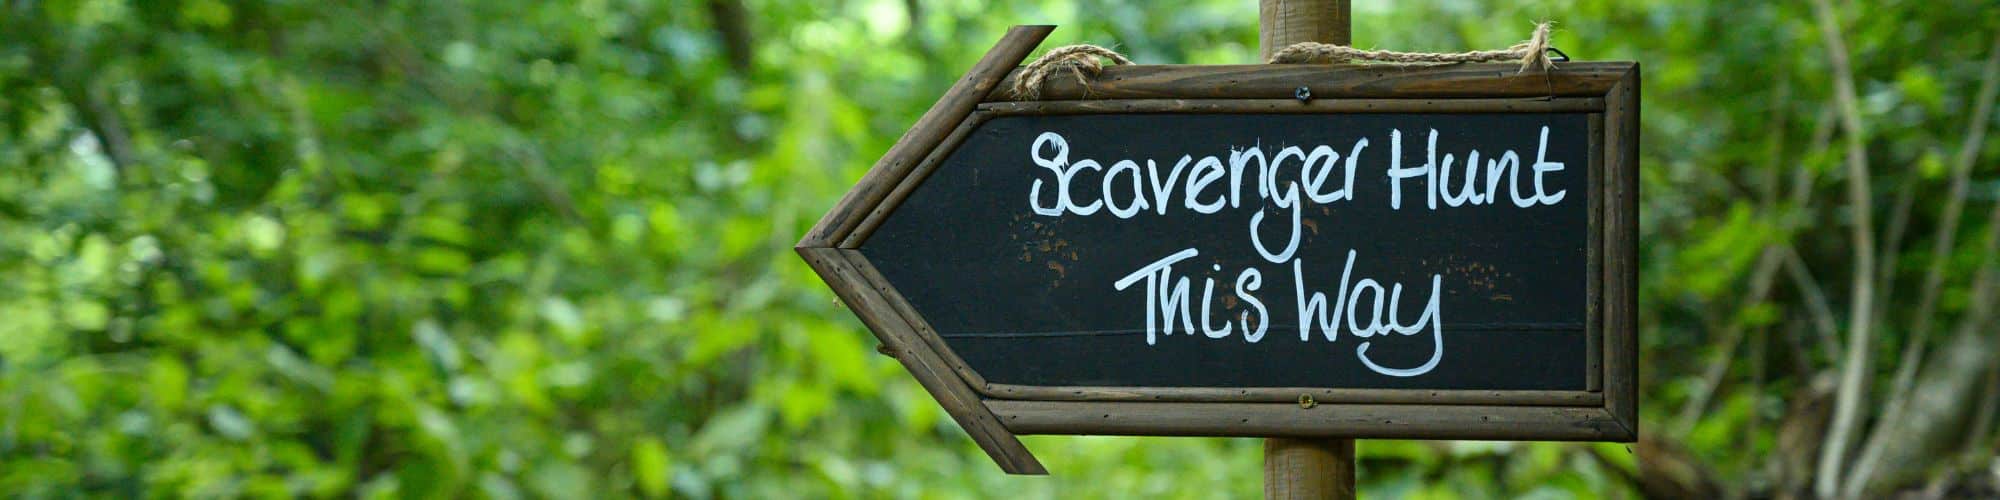 A sign for a scavenger hunt birthday party in the woods reading Scavenger Hunt This Way